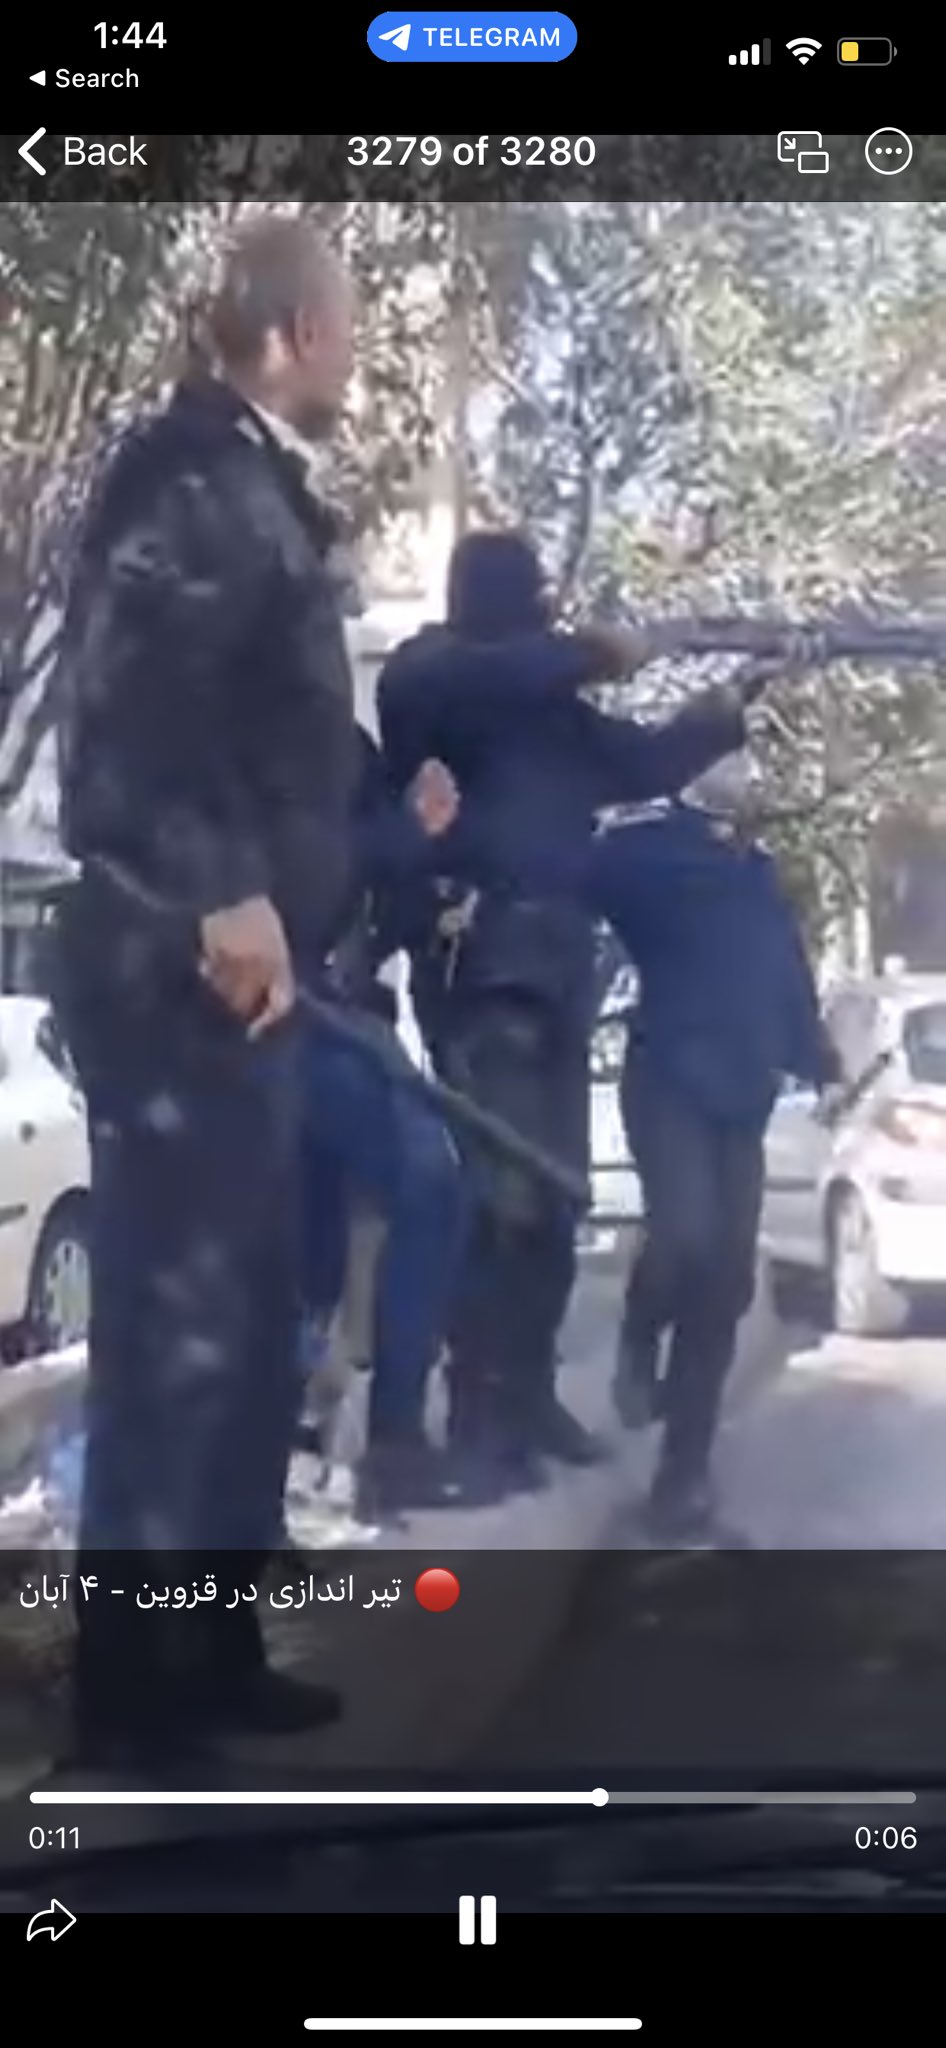 Priscillia Kounkou Hoveyda on Twitter: "📍Qazvin, WATCH til the police enters frame, raises shotgun and shoots 🤯 ‼️‼️‼️ #Iran cops with shotguns and ski masks on, shoots in broad day light amongst